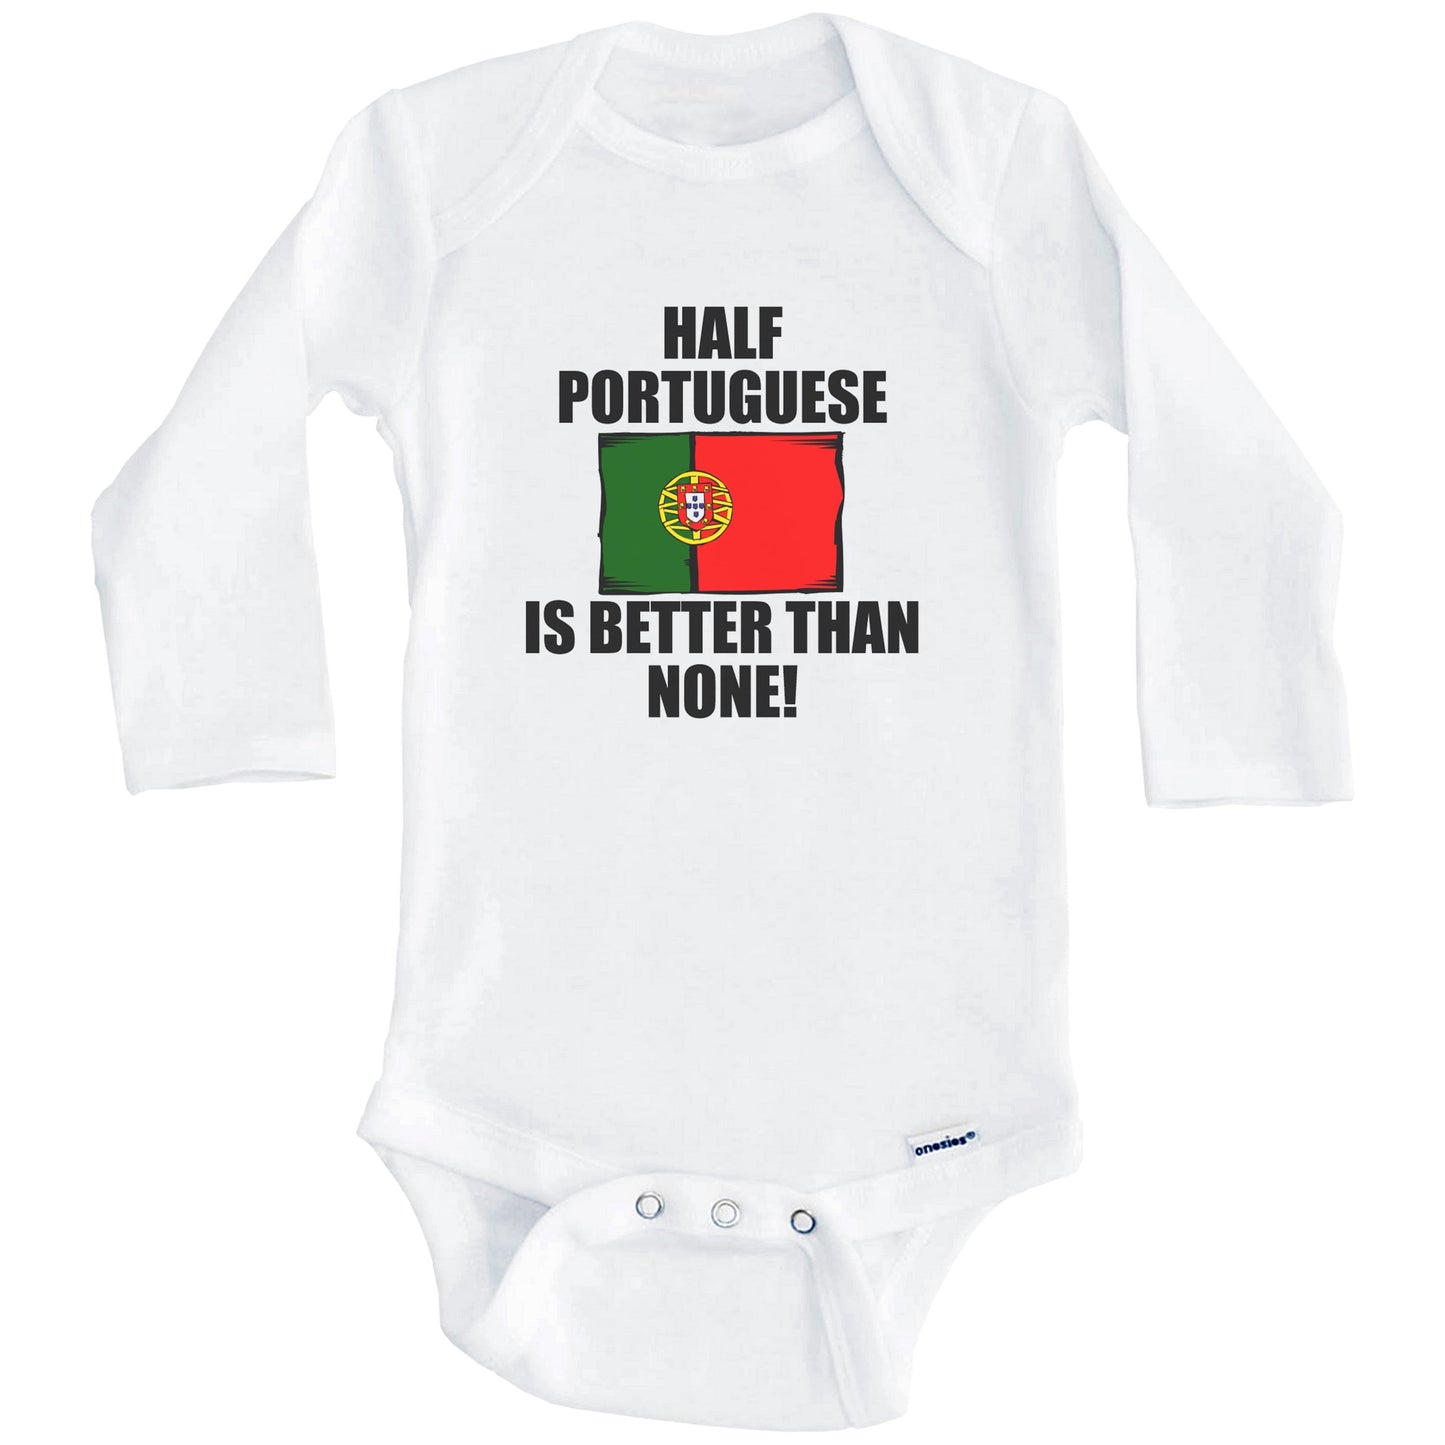 Half Portuguese Is Better Than None Baby Onesie (Long Sleeves)